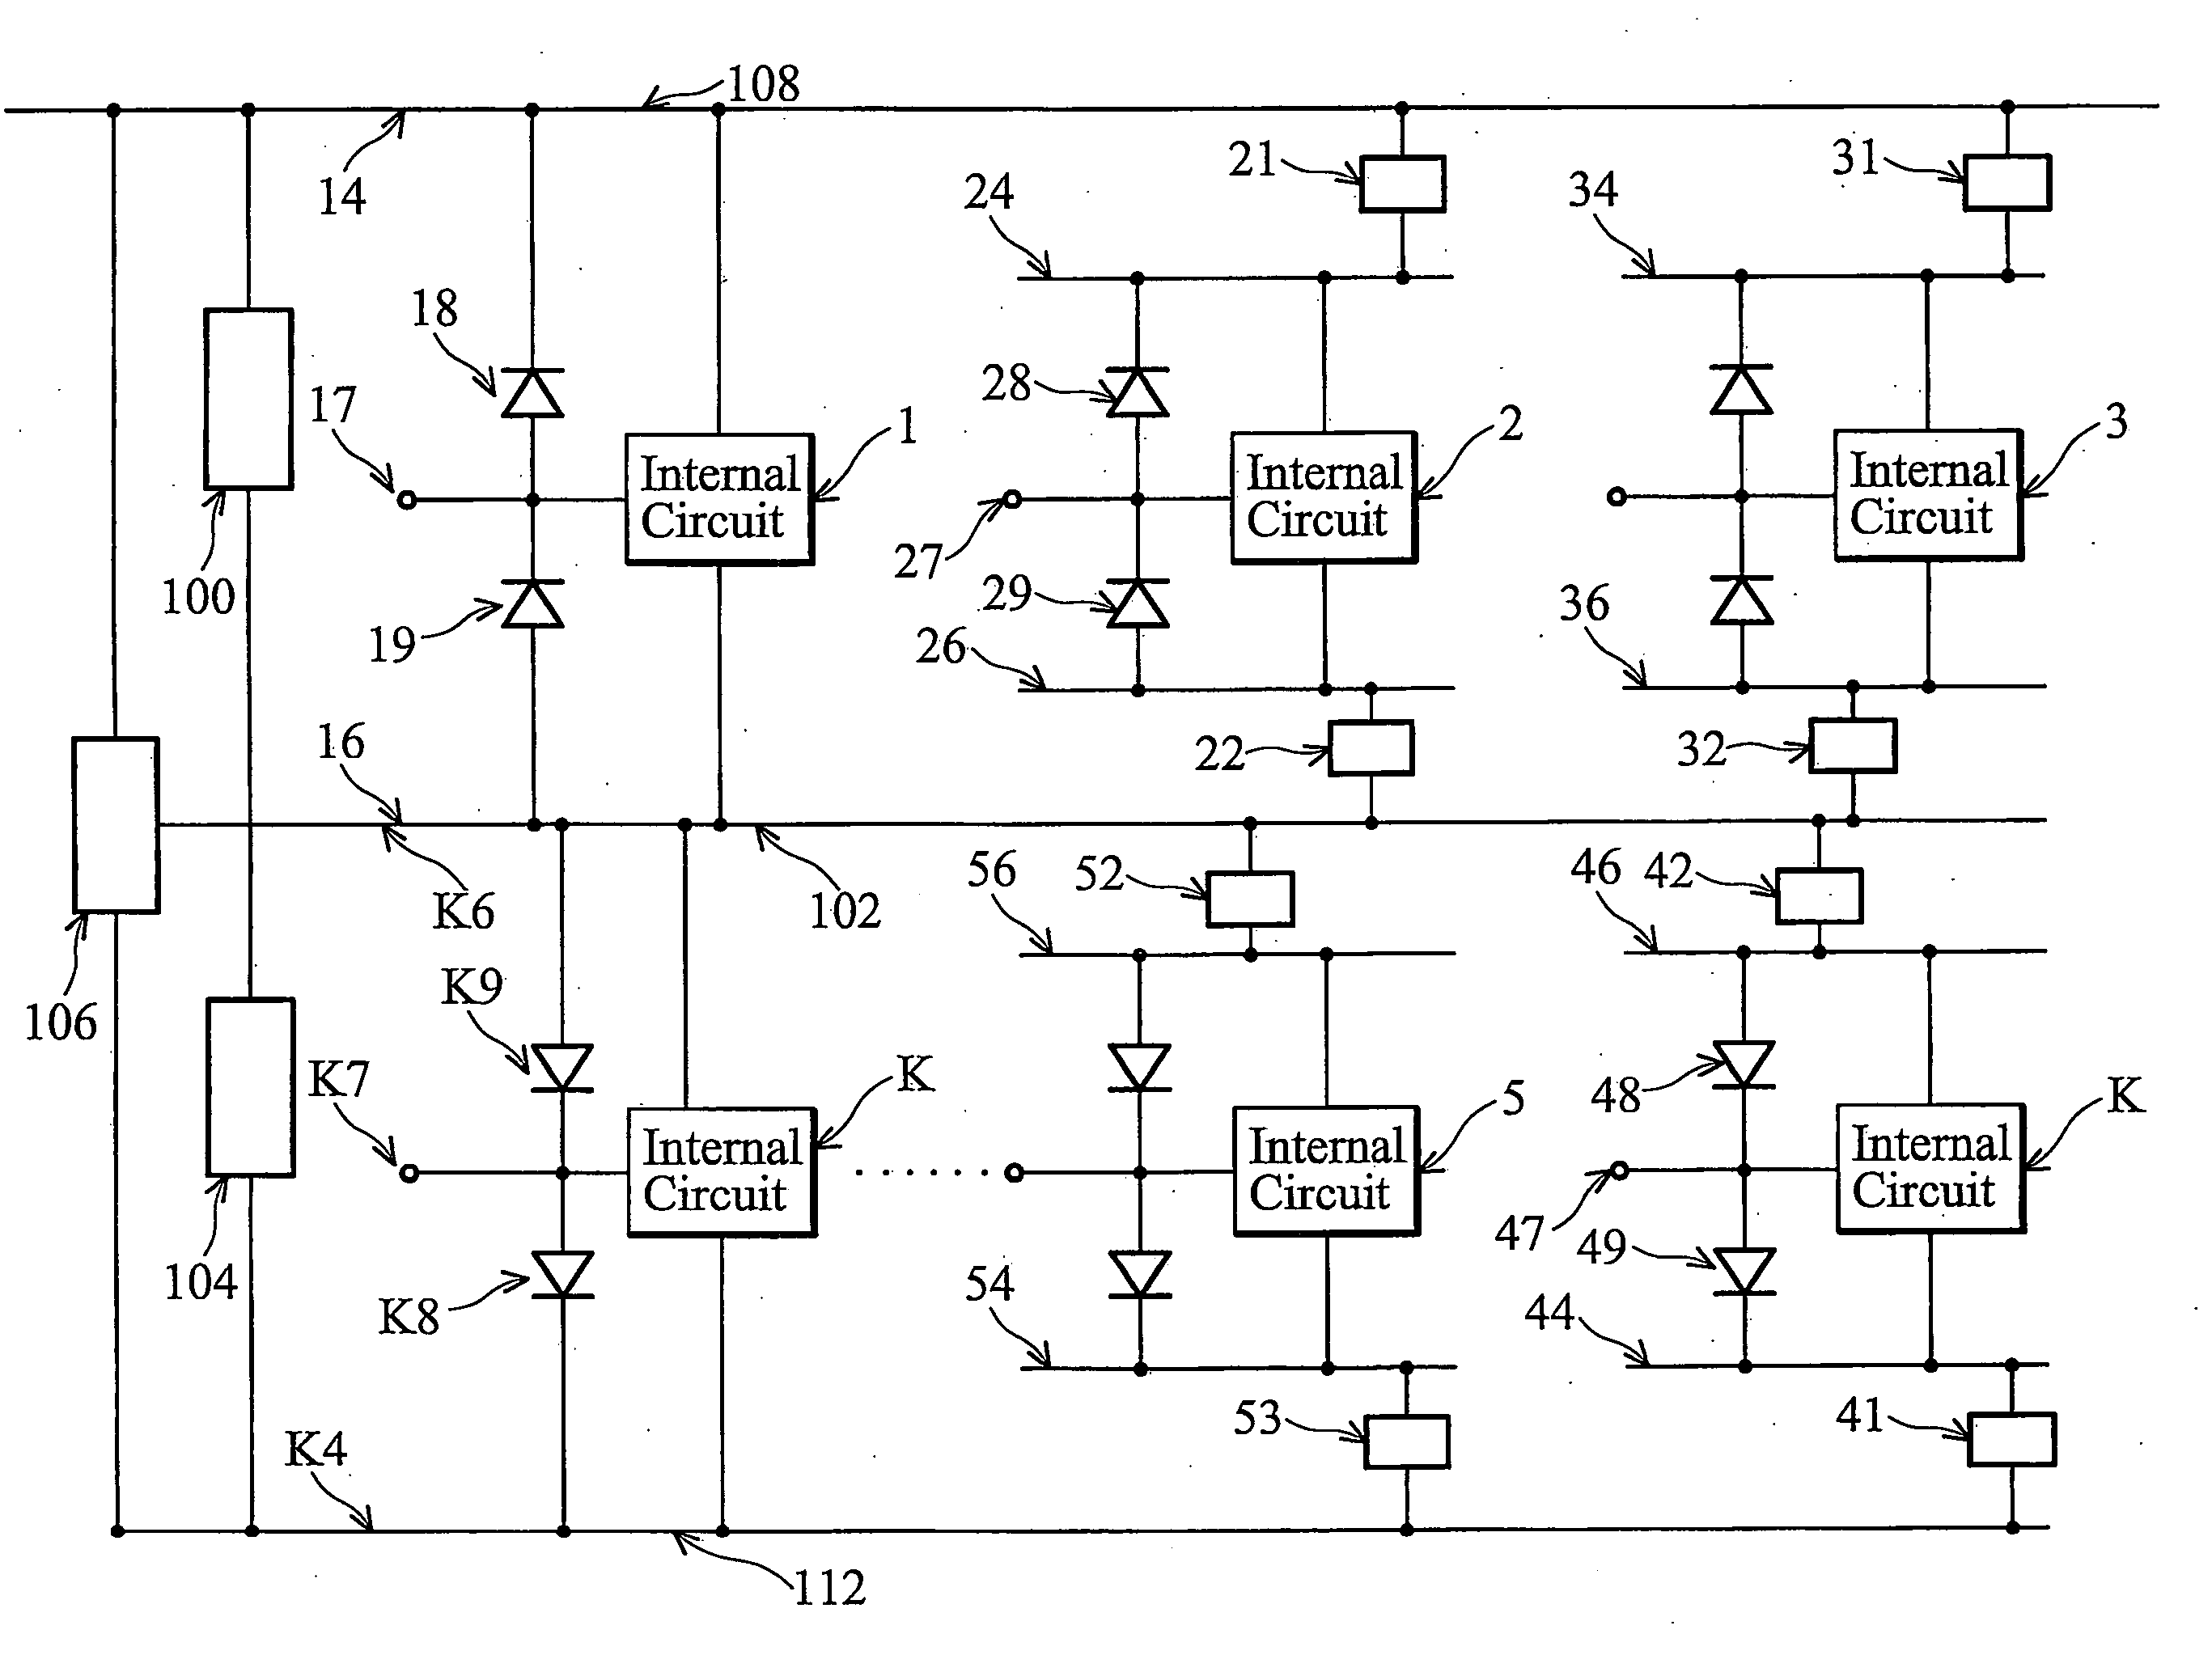 Multi-domain ESD protection circuit structure